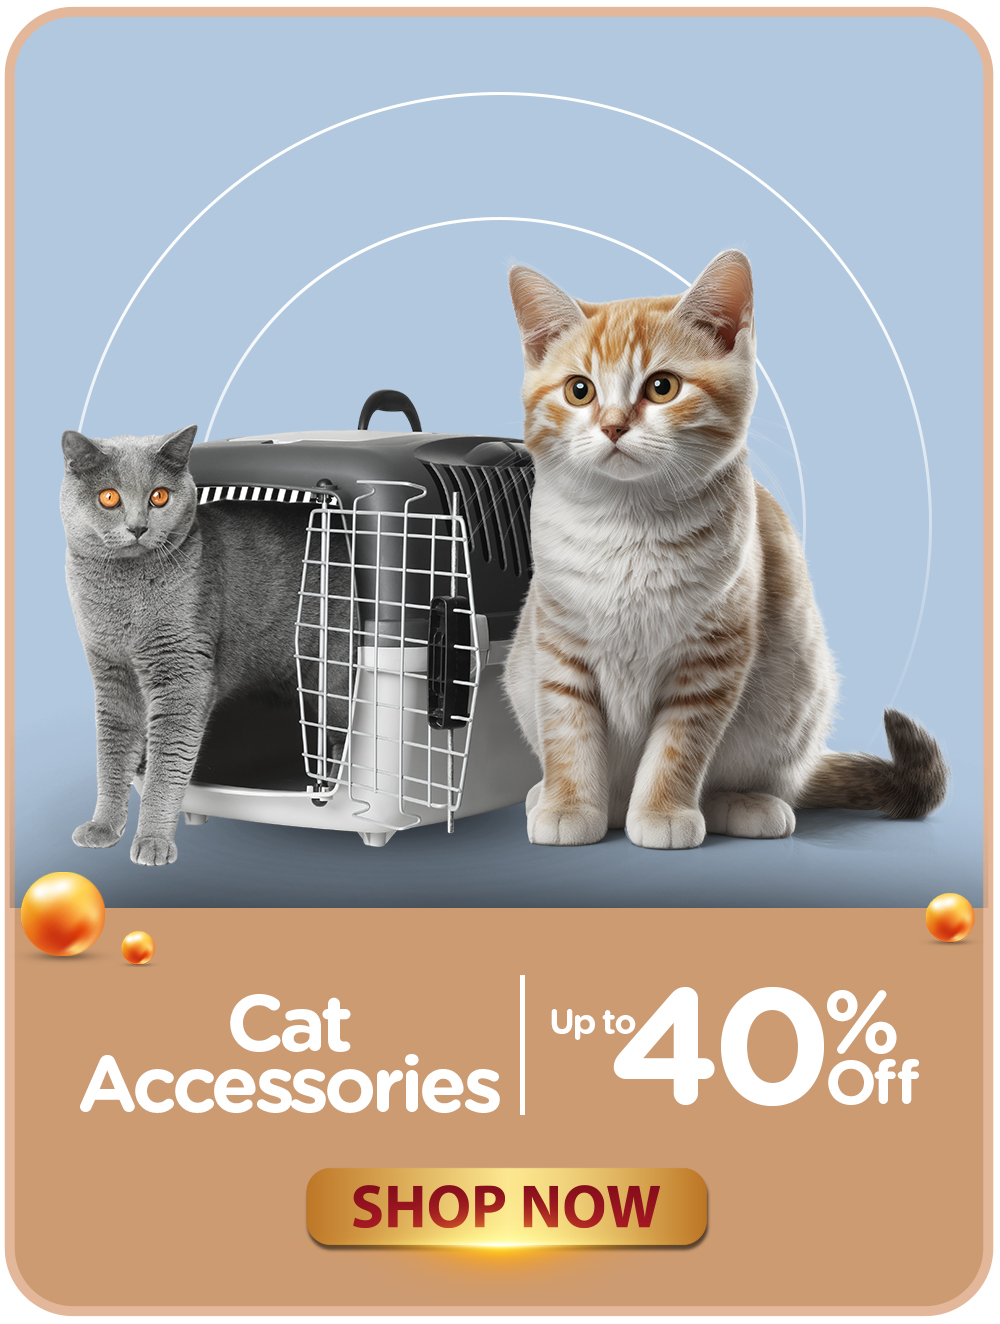 07 - CATEGORY BANNERS - CAT ACCESSORIES VER2